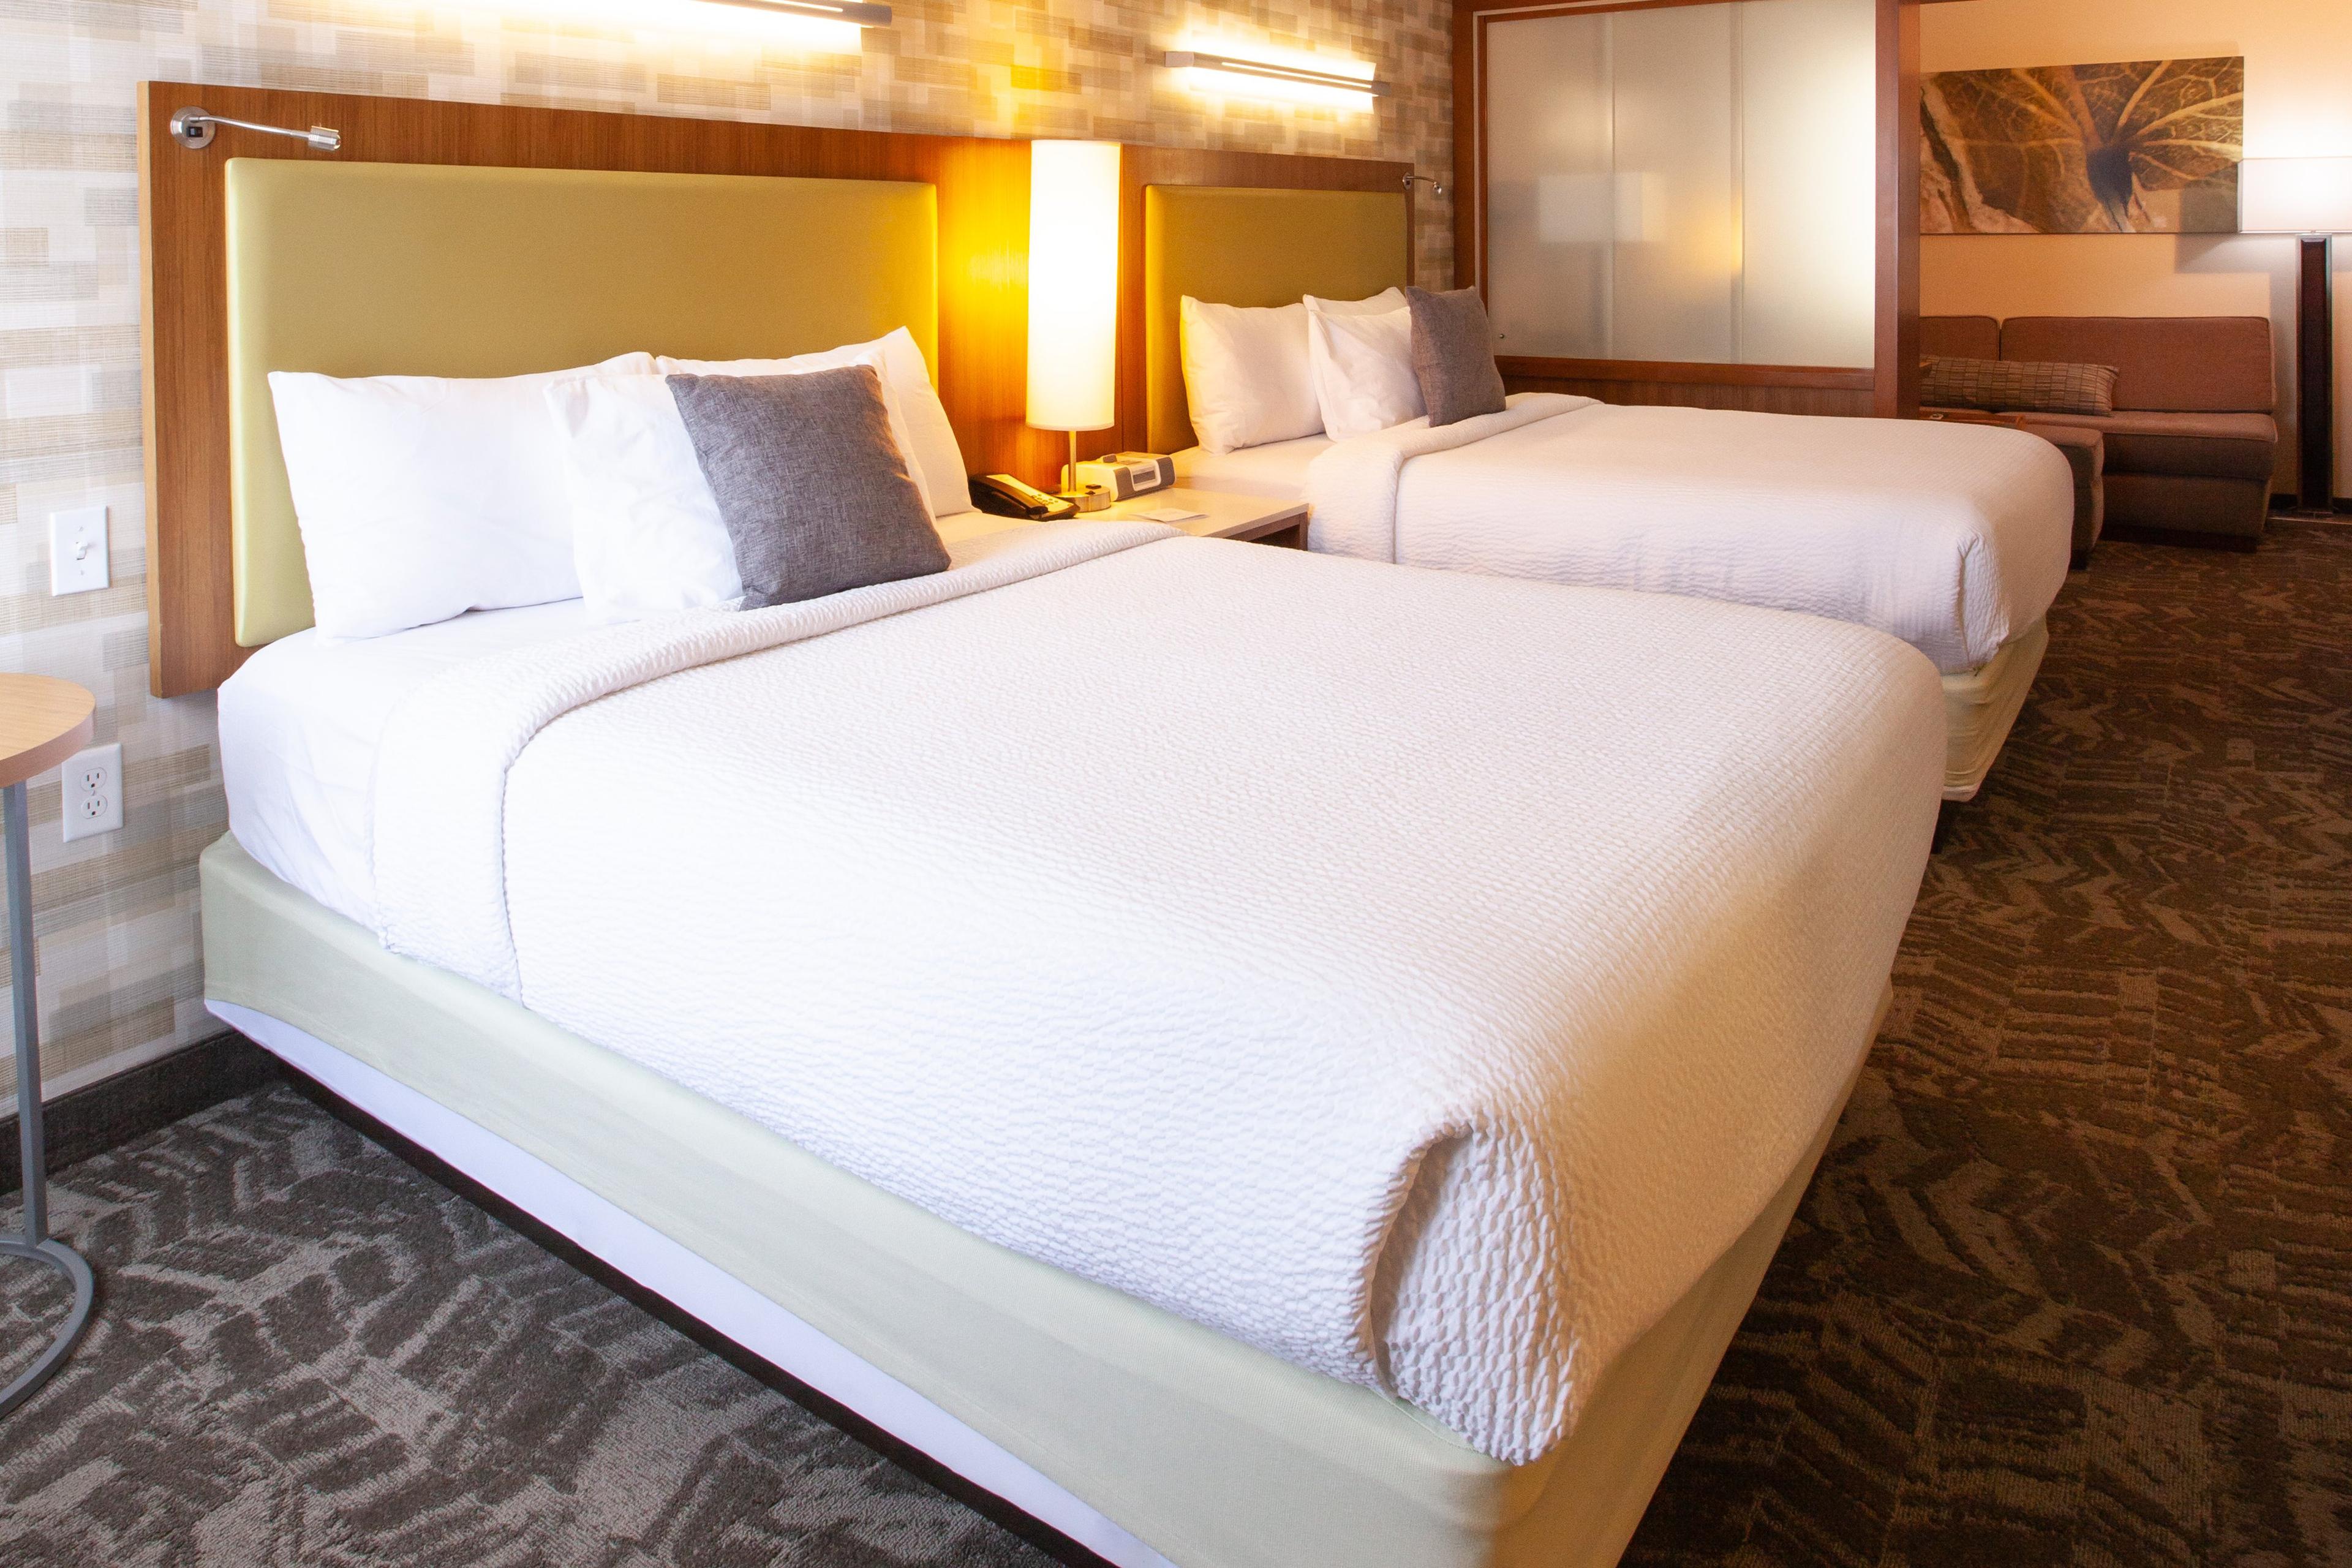 Enjoy staying in a suite with two queen-size beds in a separate sleeping area.